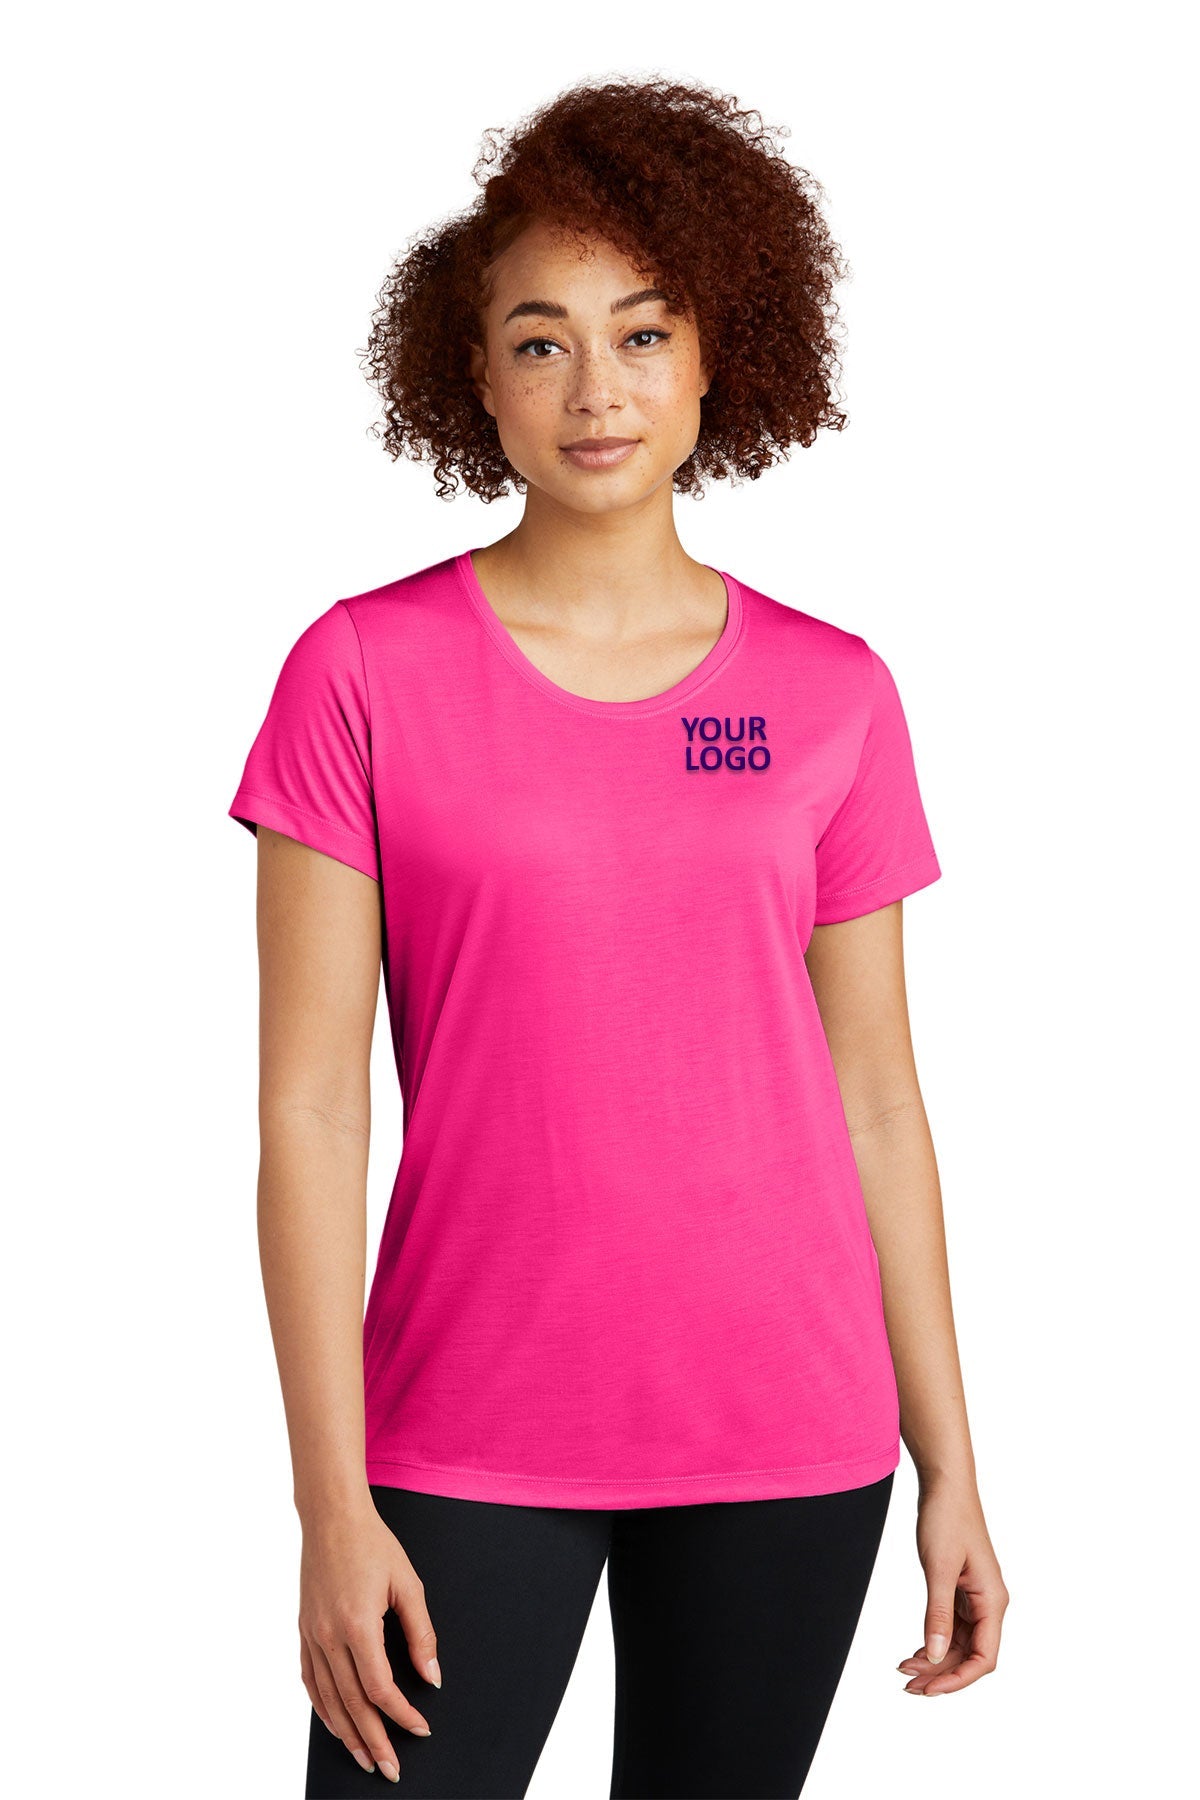 Sport-Tek Ladies PosiCharge Competitor Cotton Touch Customized Scoop Neck Tee's, Neon Pink